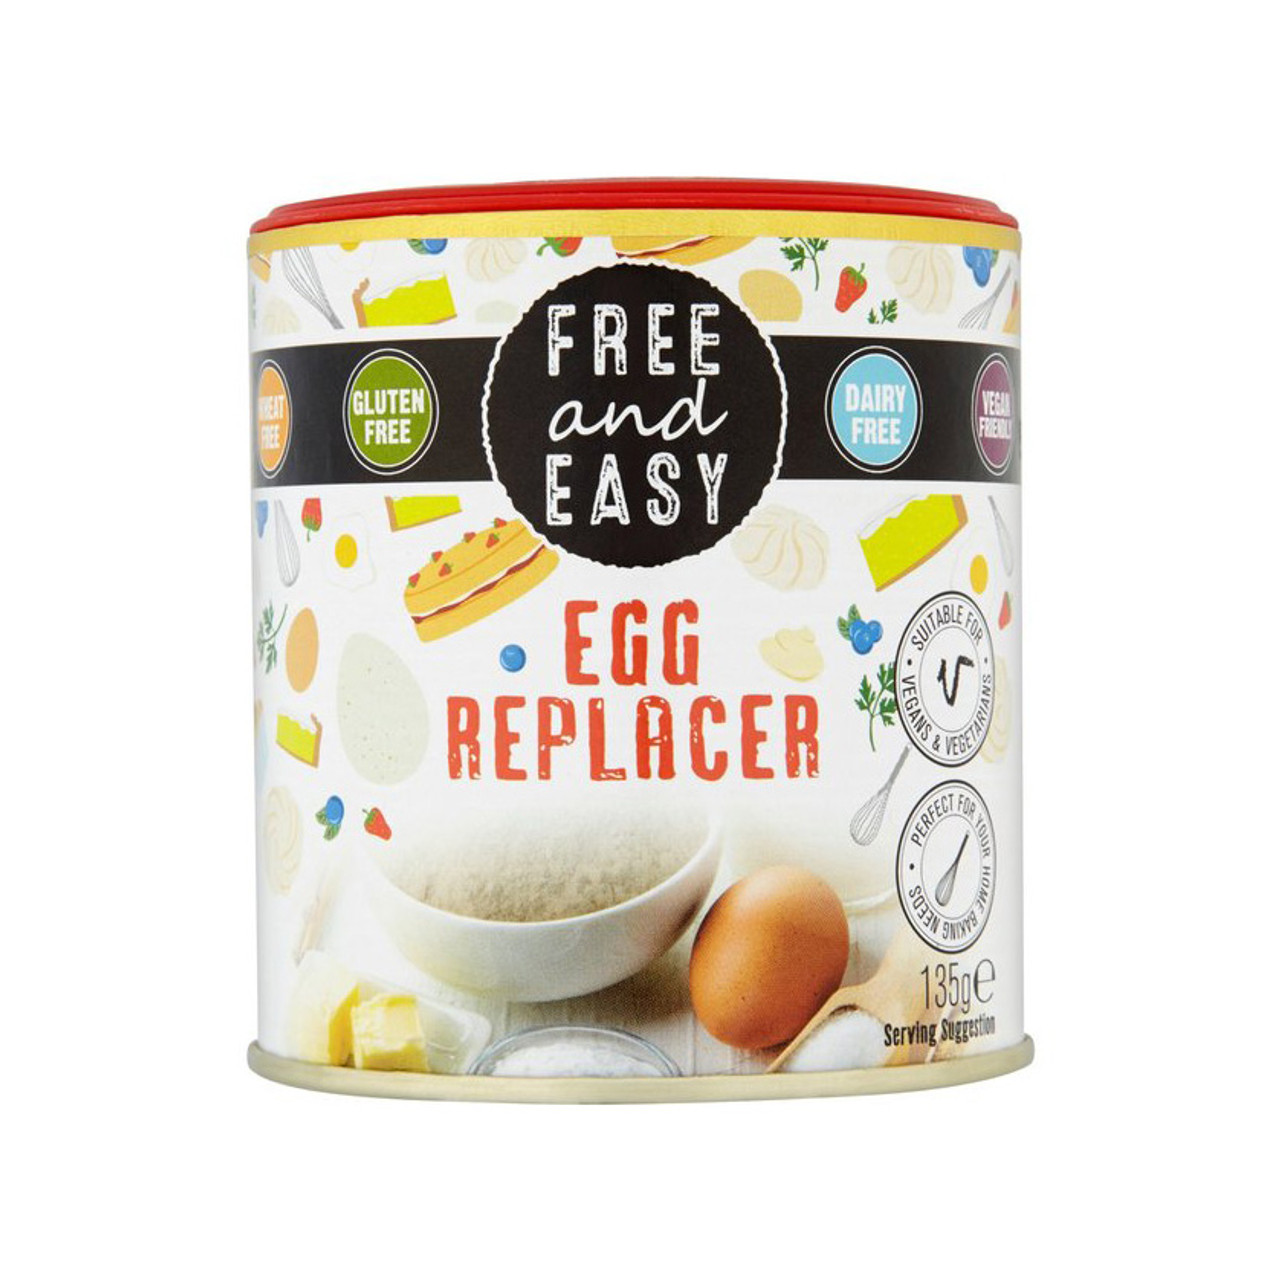 FREE & EASY EGG REPLACER 135G